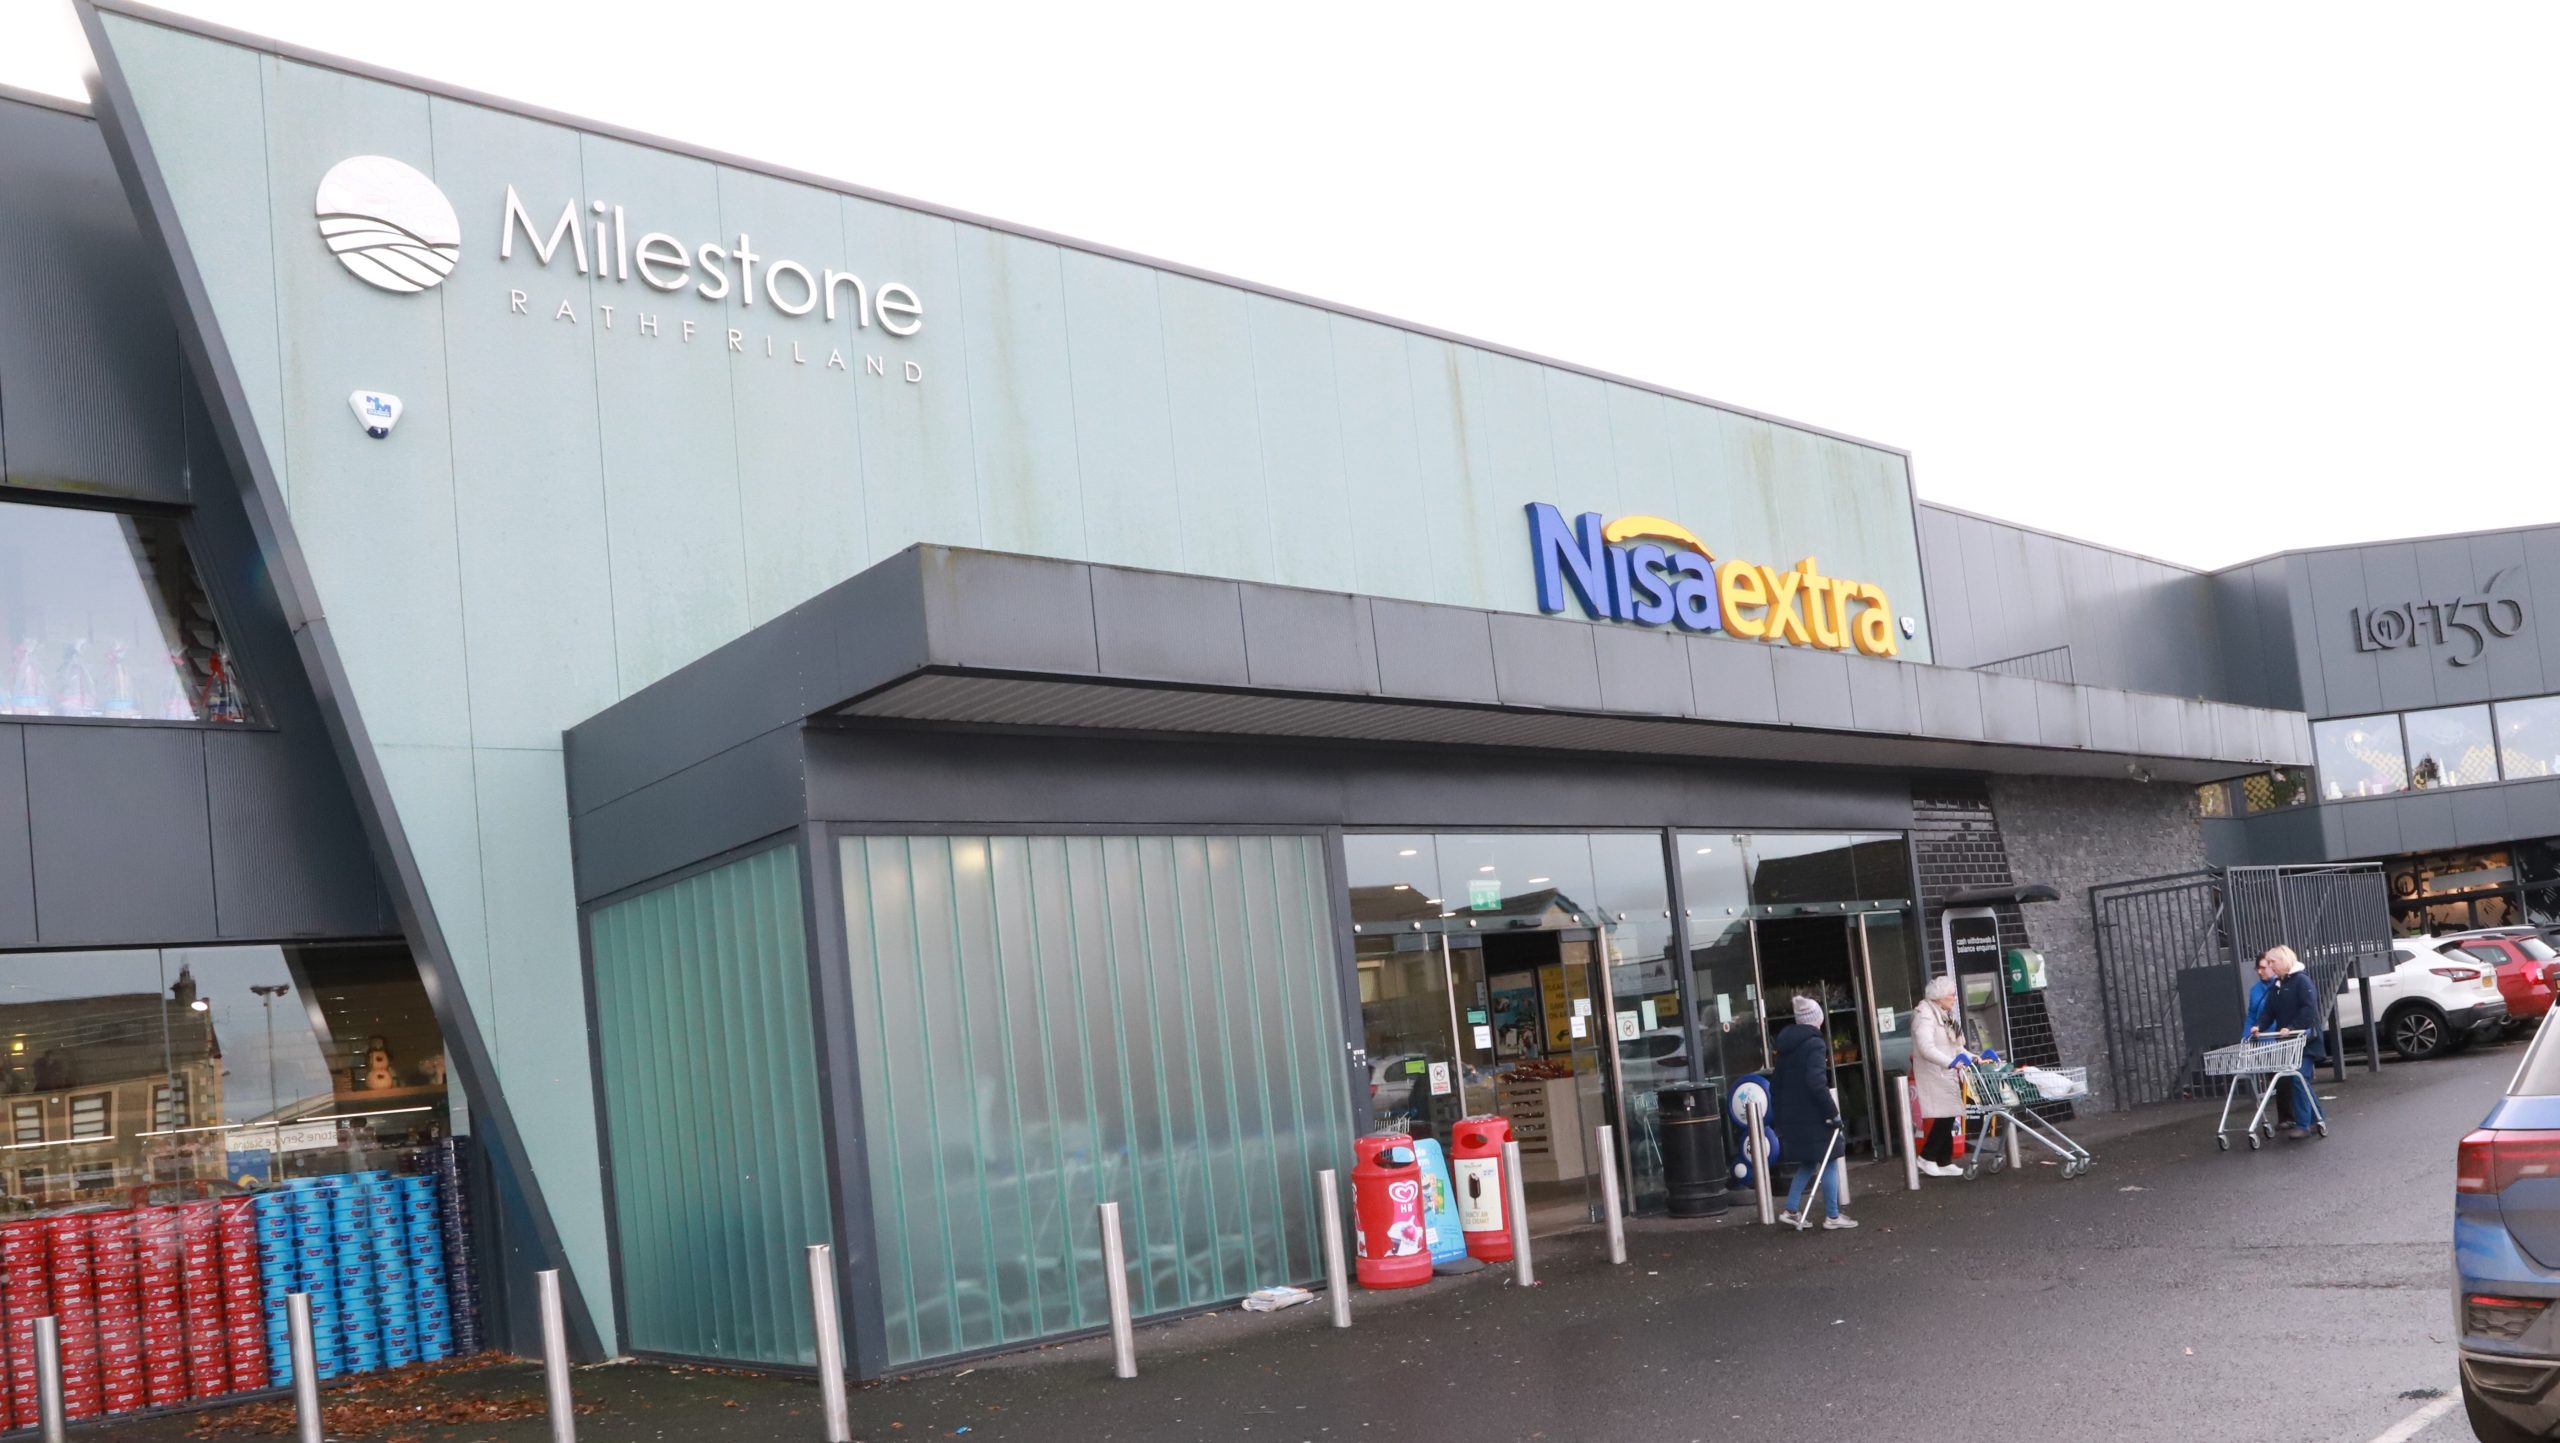 Milestone Rathfriland – setting the store standard for NI independent retailers